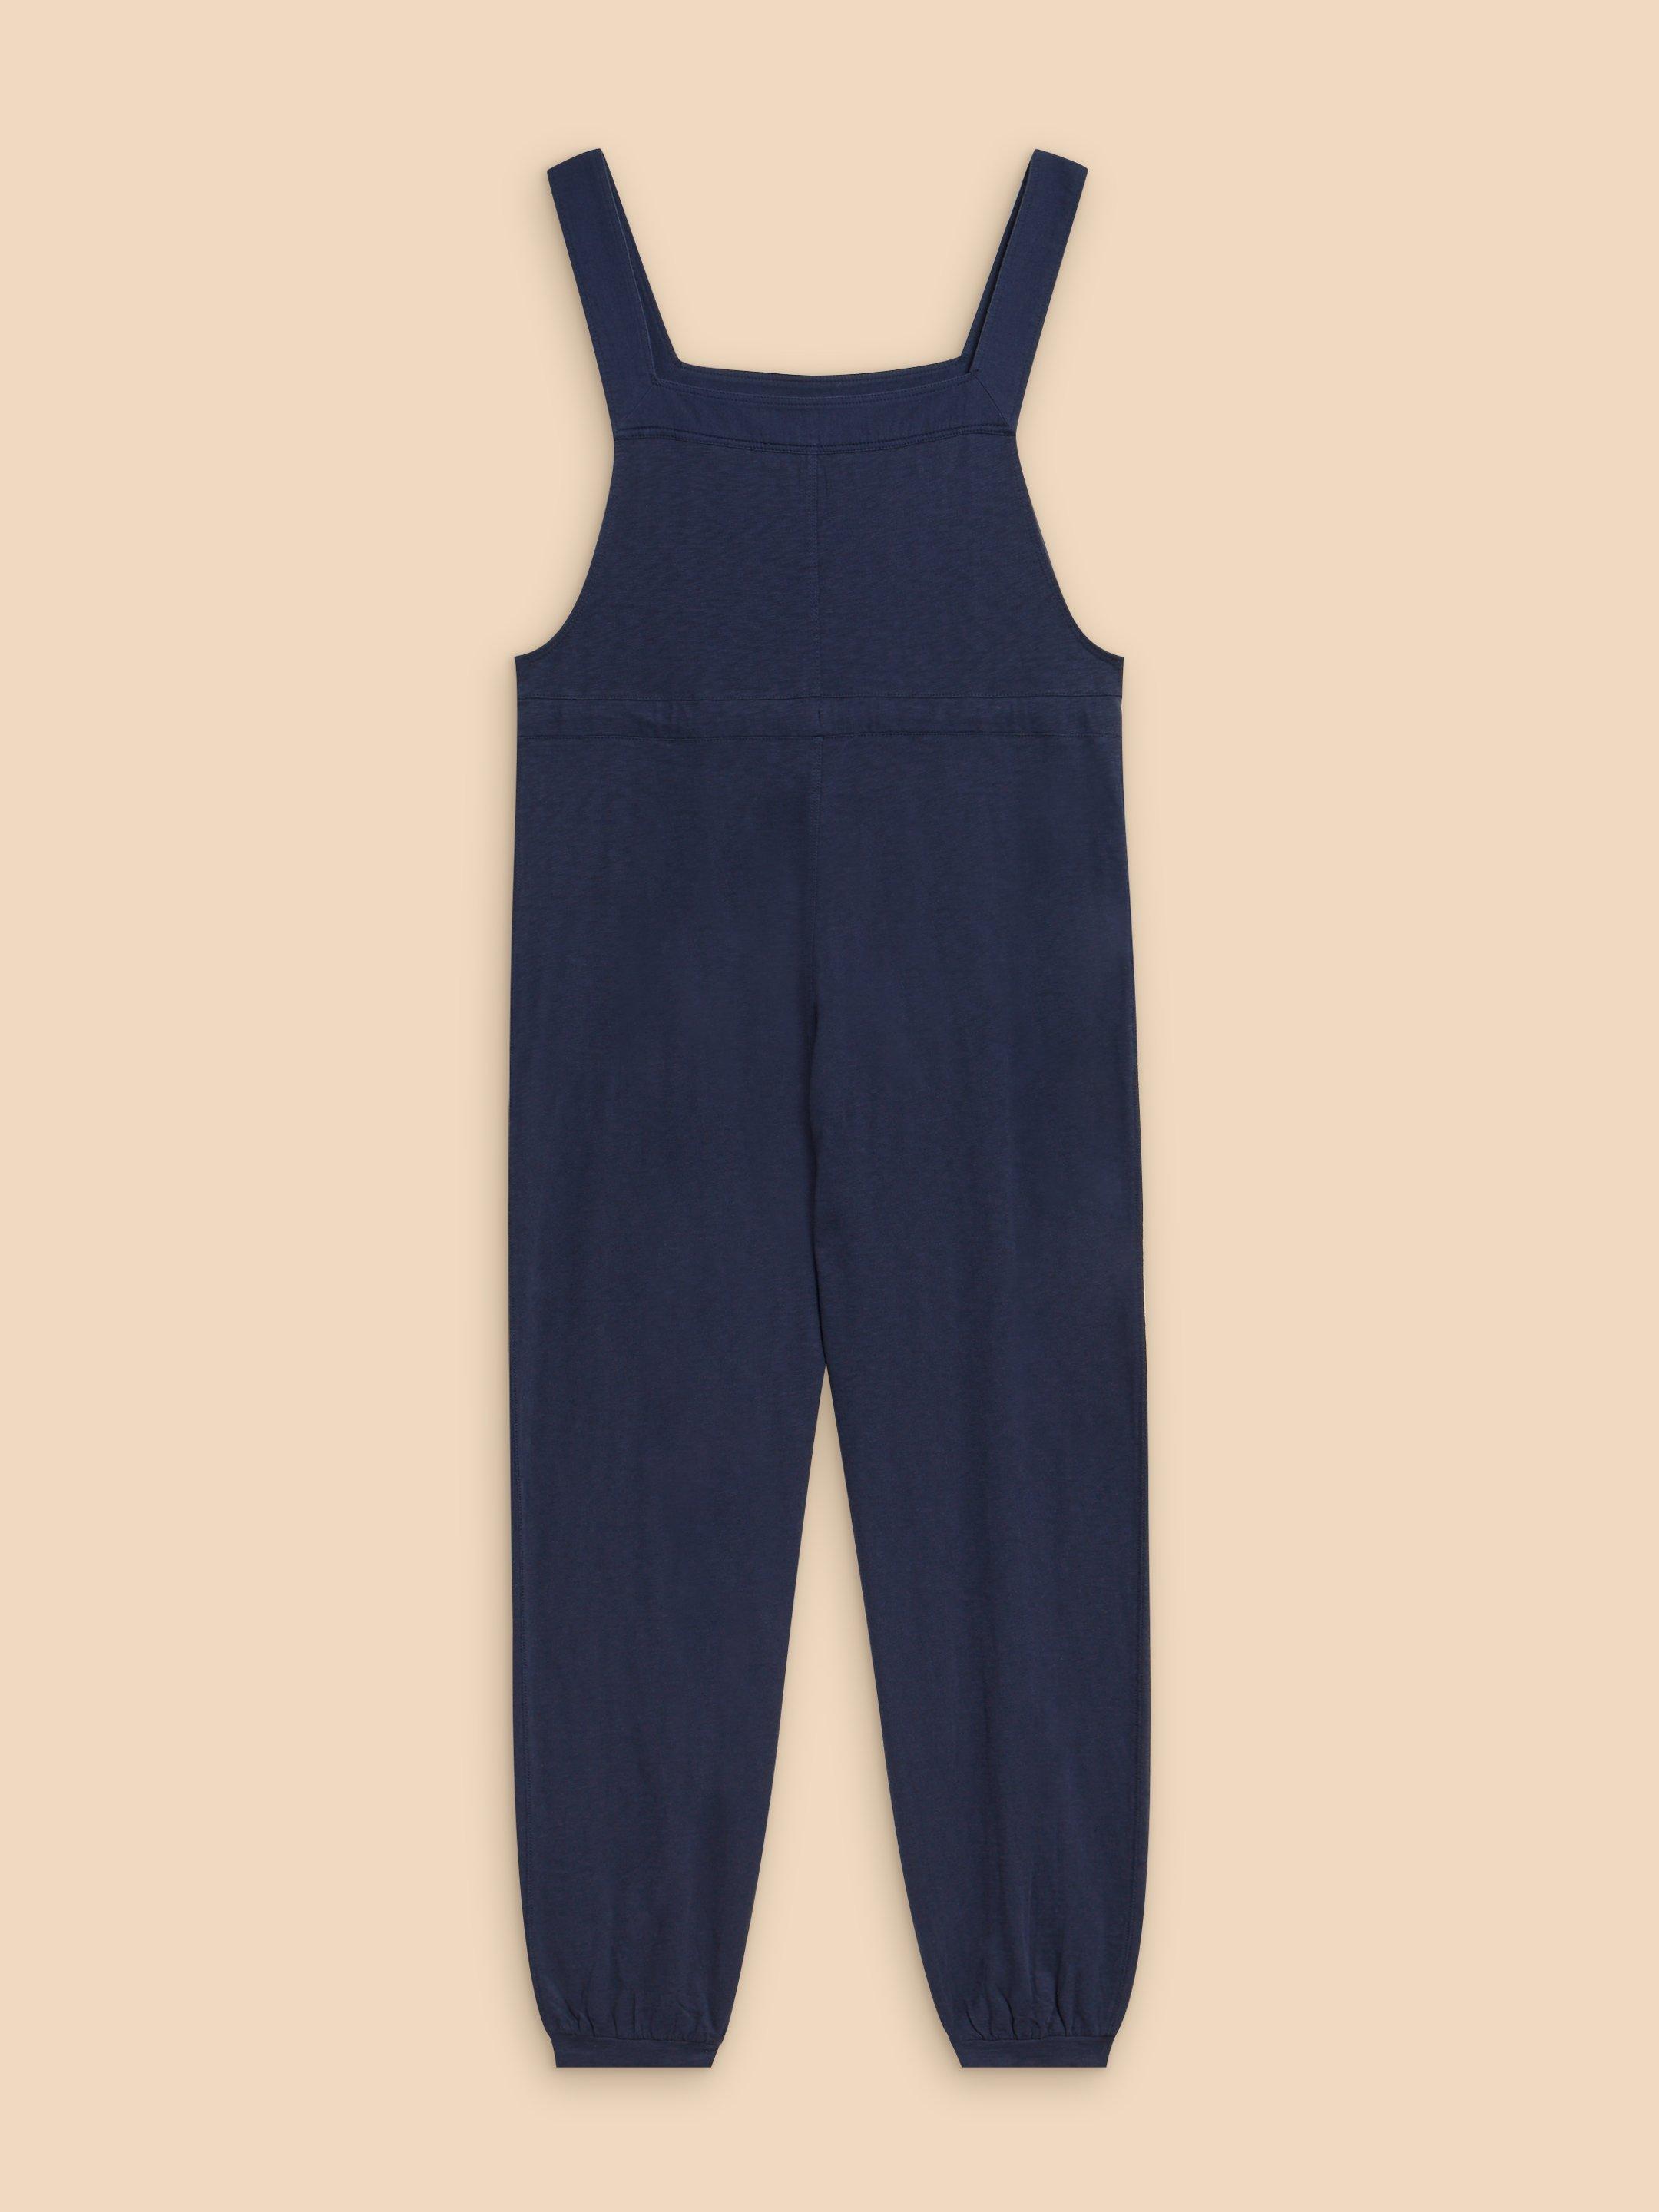 Daphne Jersey Dungaree in FR NAVY - FLAT BACK